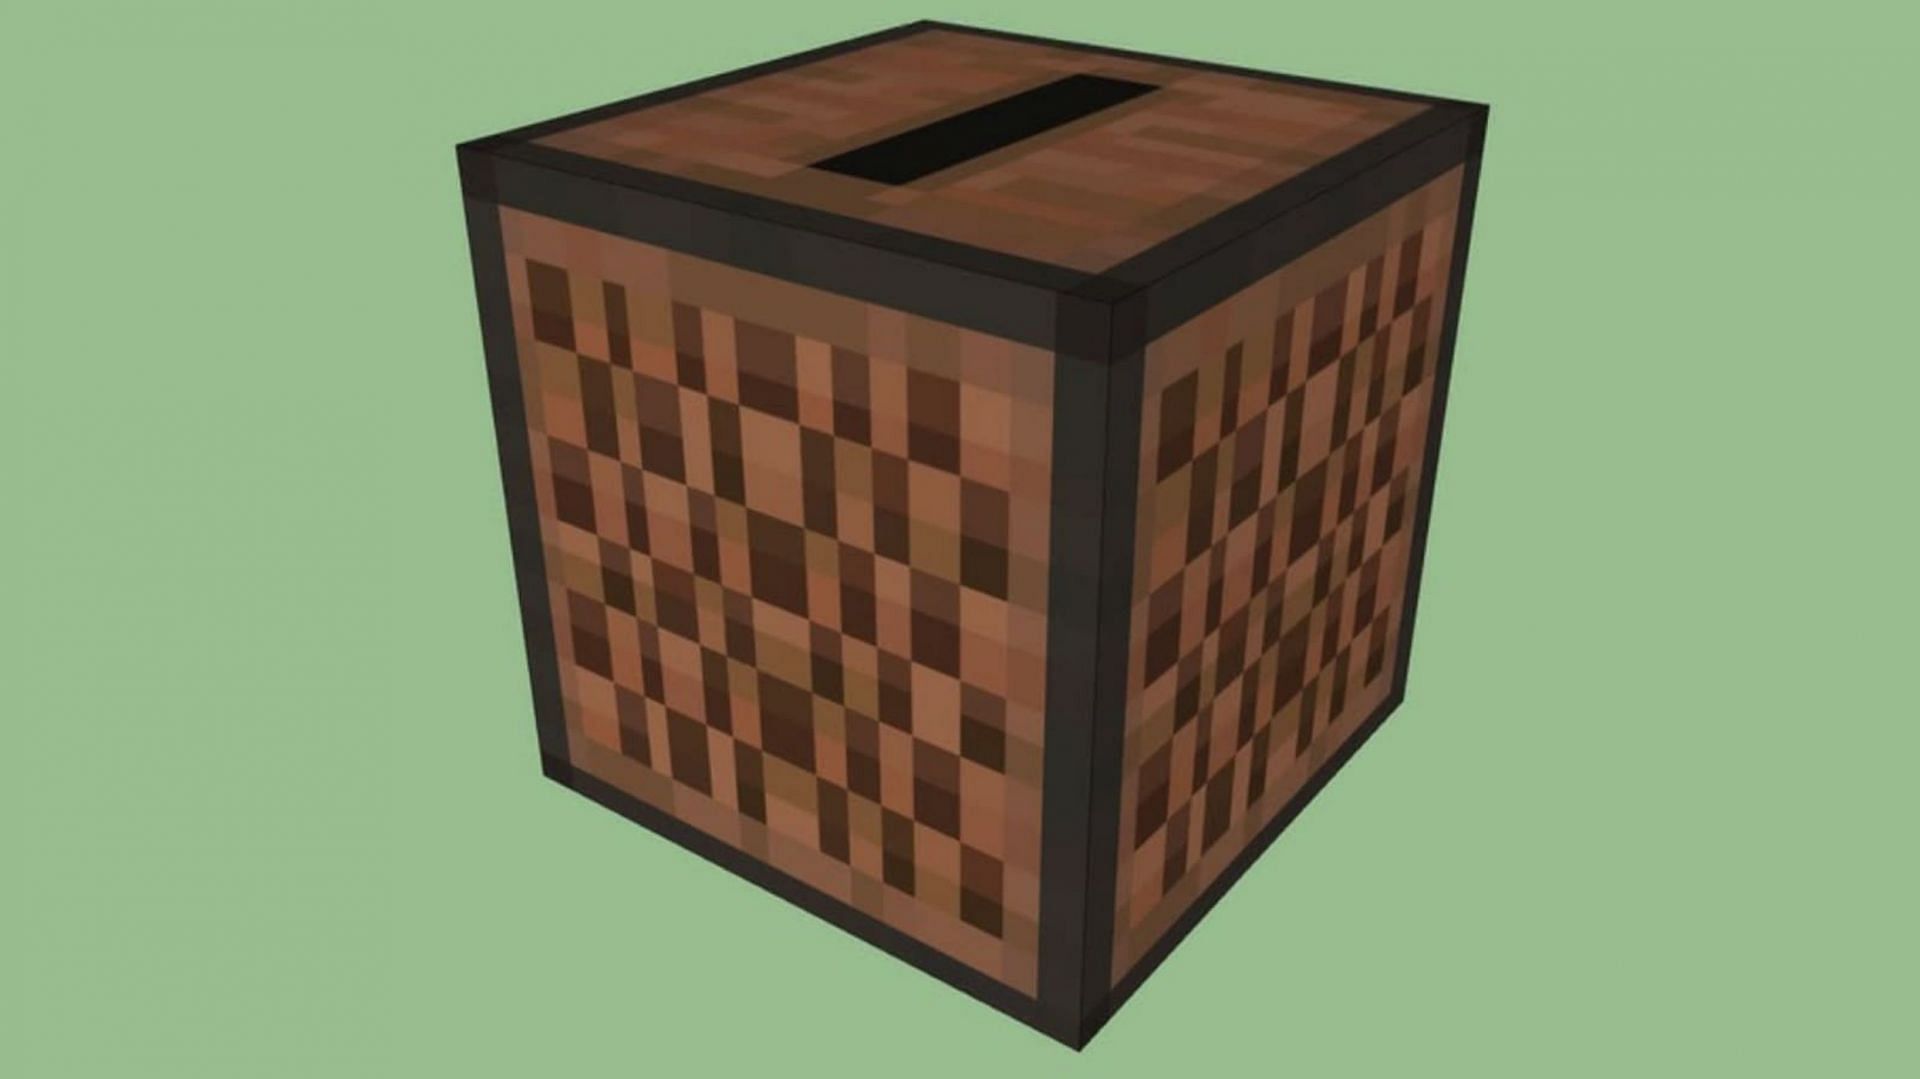 Jukeboxes should accommodate the new music discs nicely (Image via Mojang)